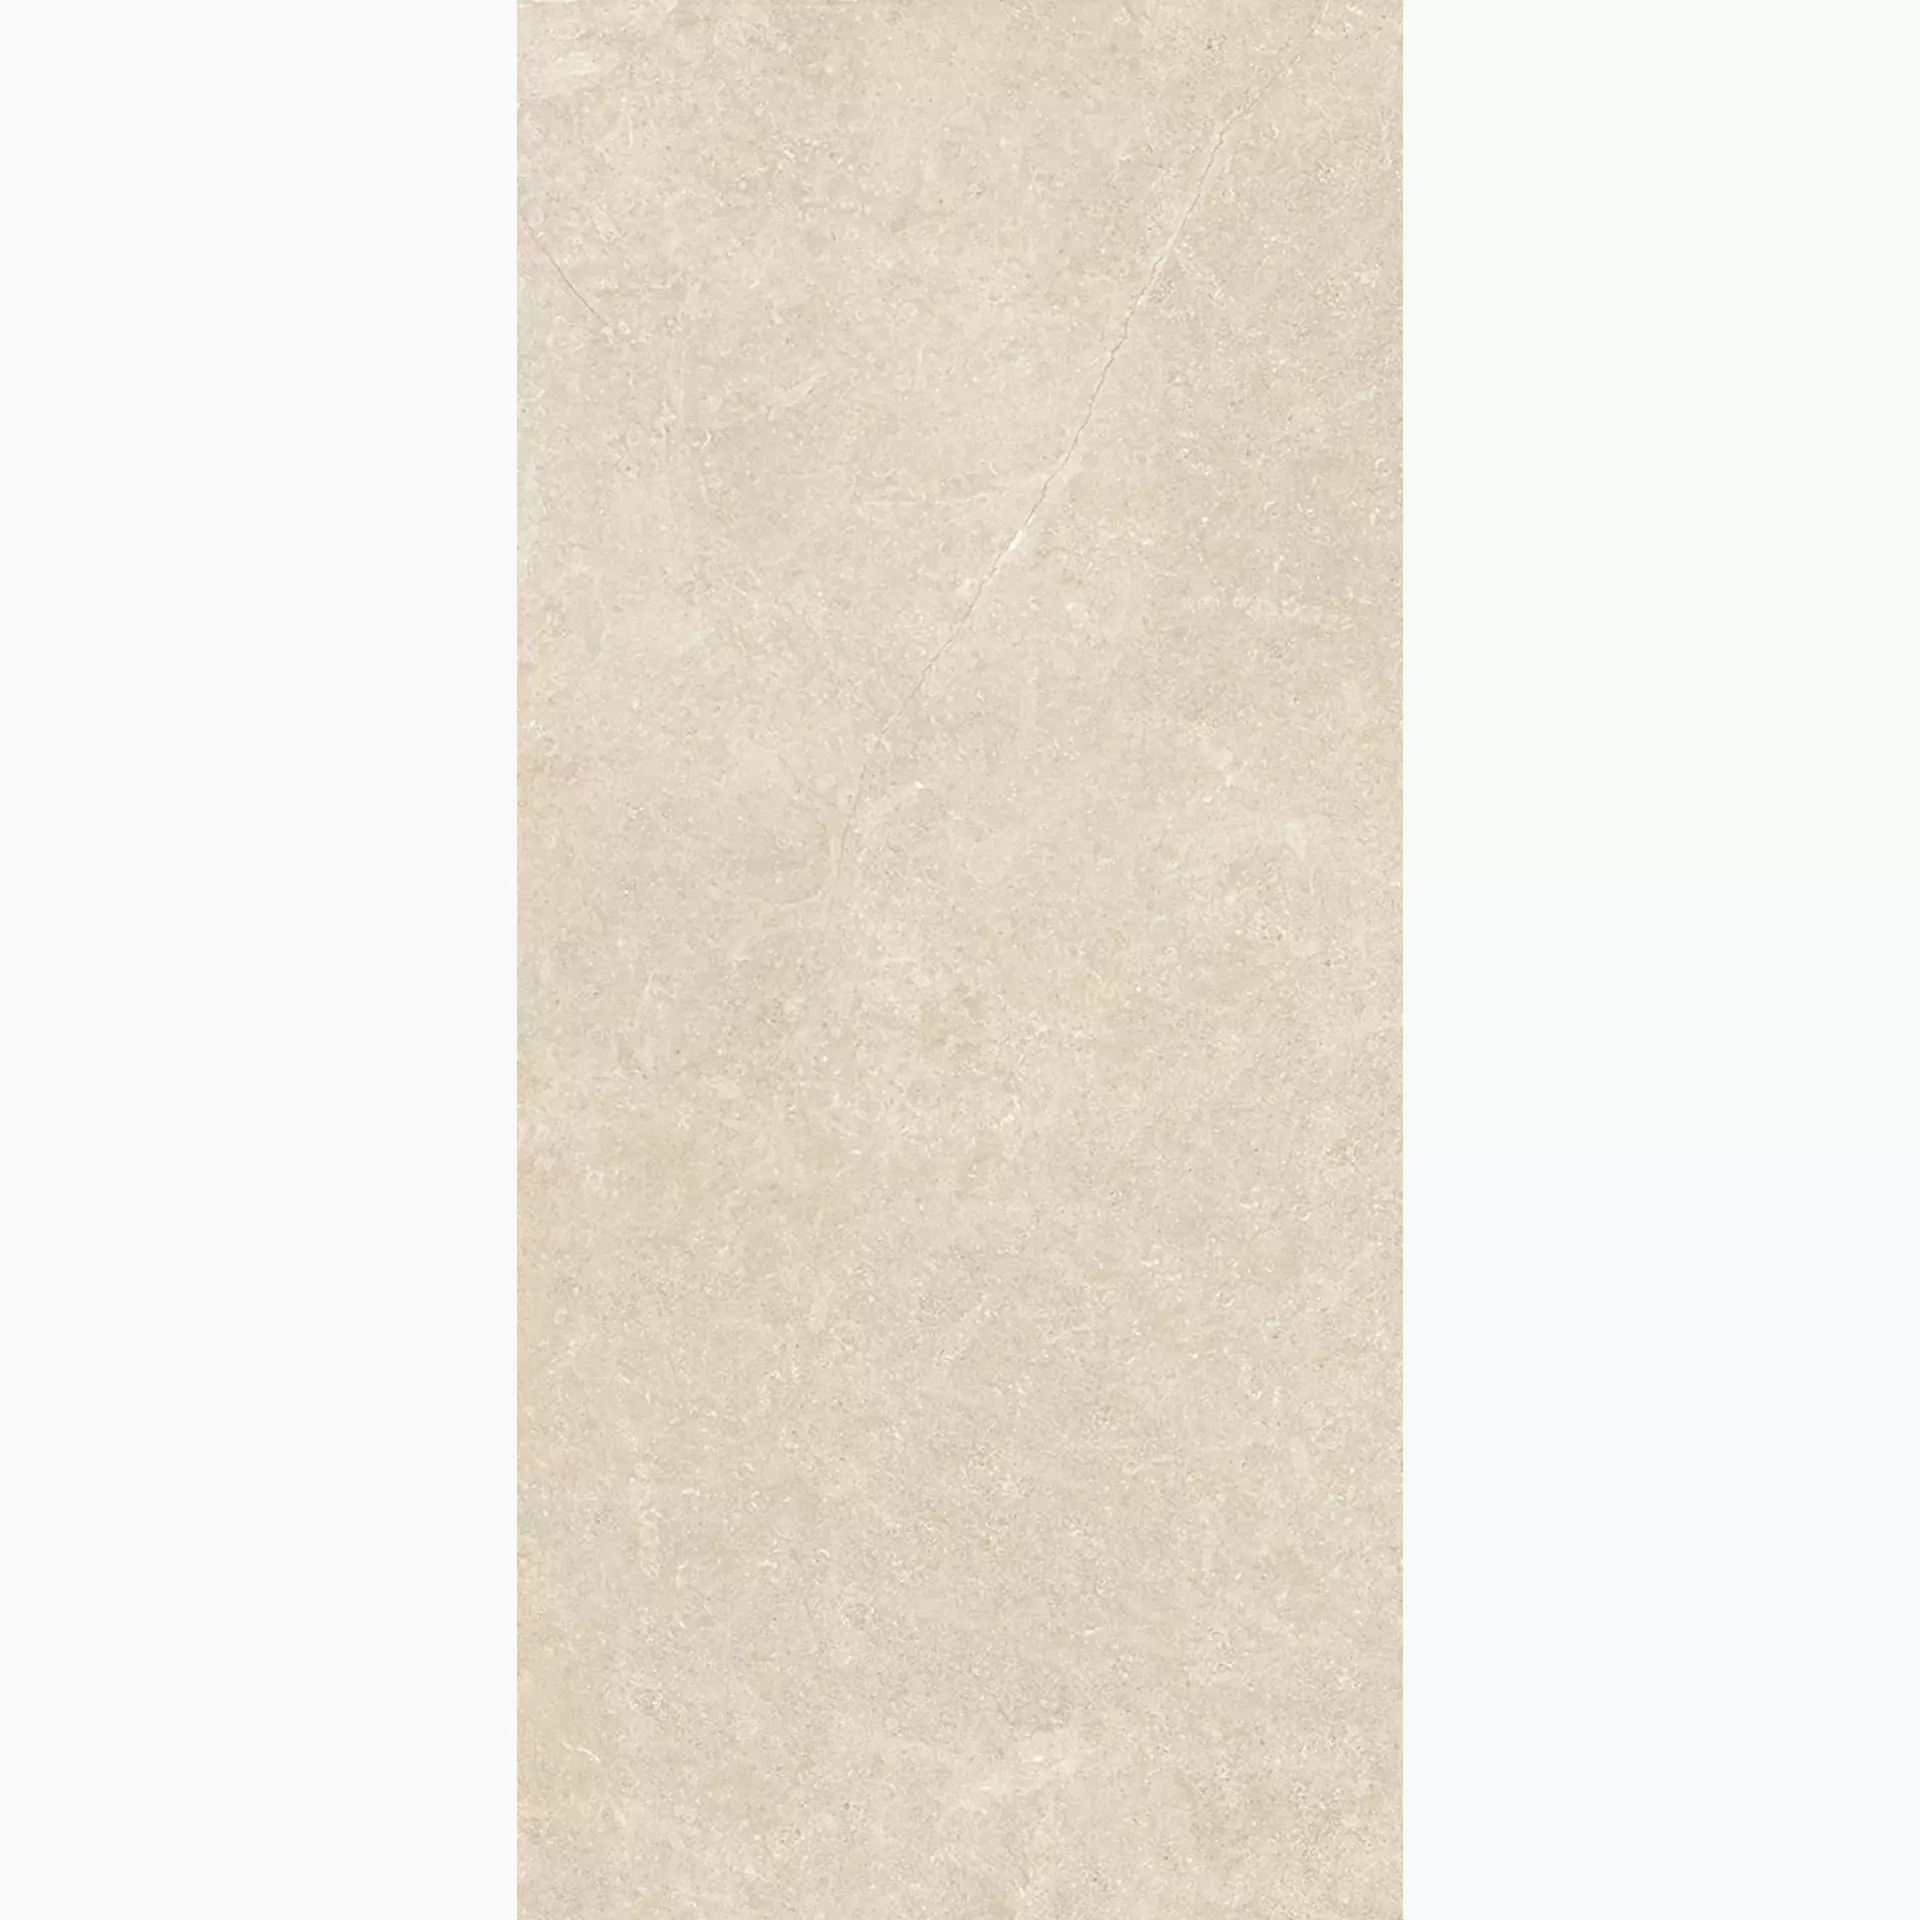 Coem Wide Gres Beige Naturale Modica 0MD122R 120x120cm rectified 6mm